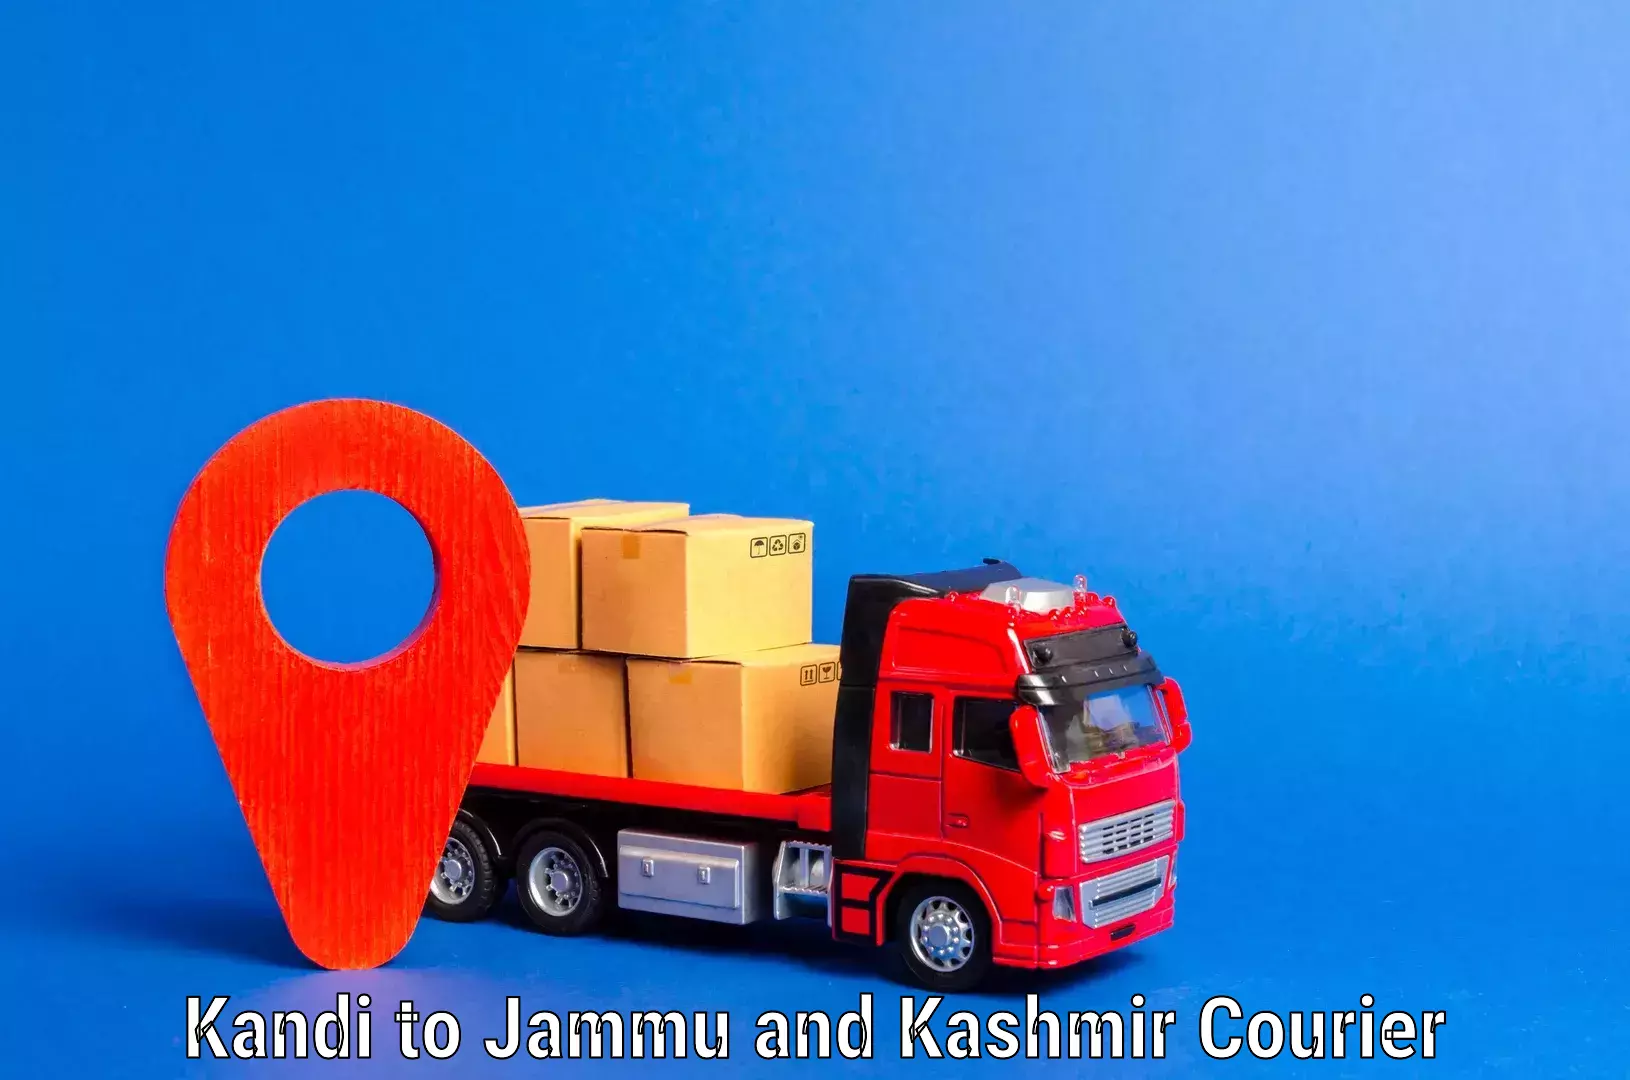 Residential moving experts Kandi to Jammu and Kashmir